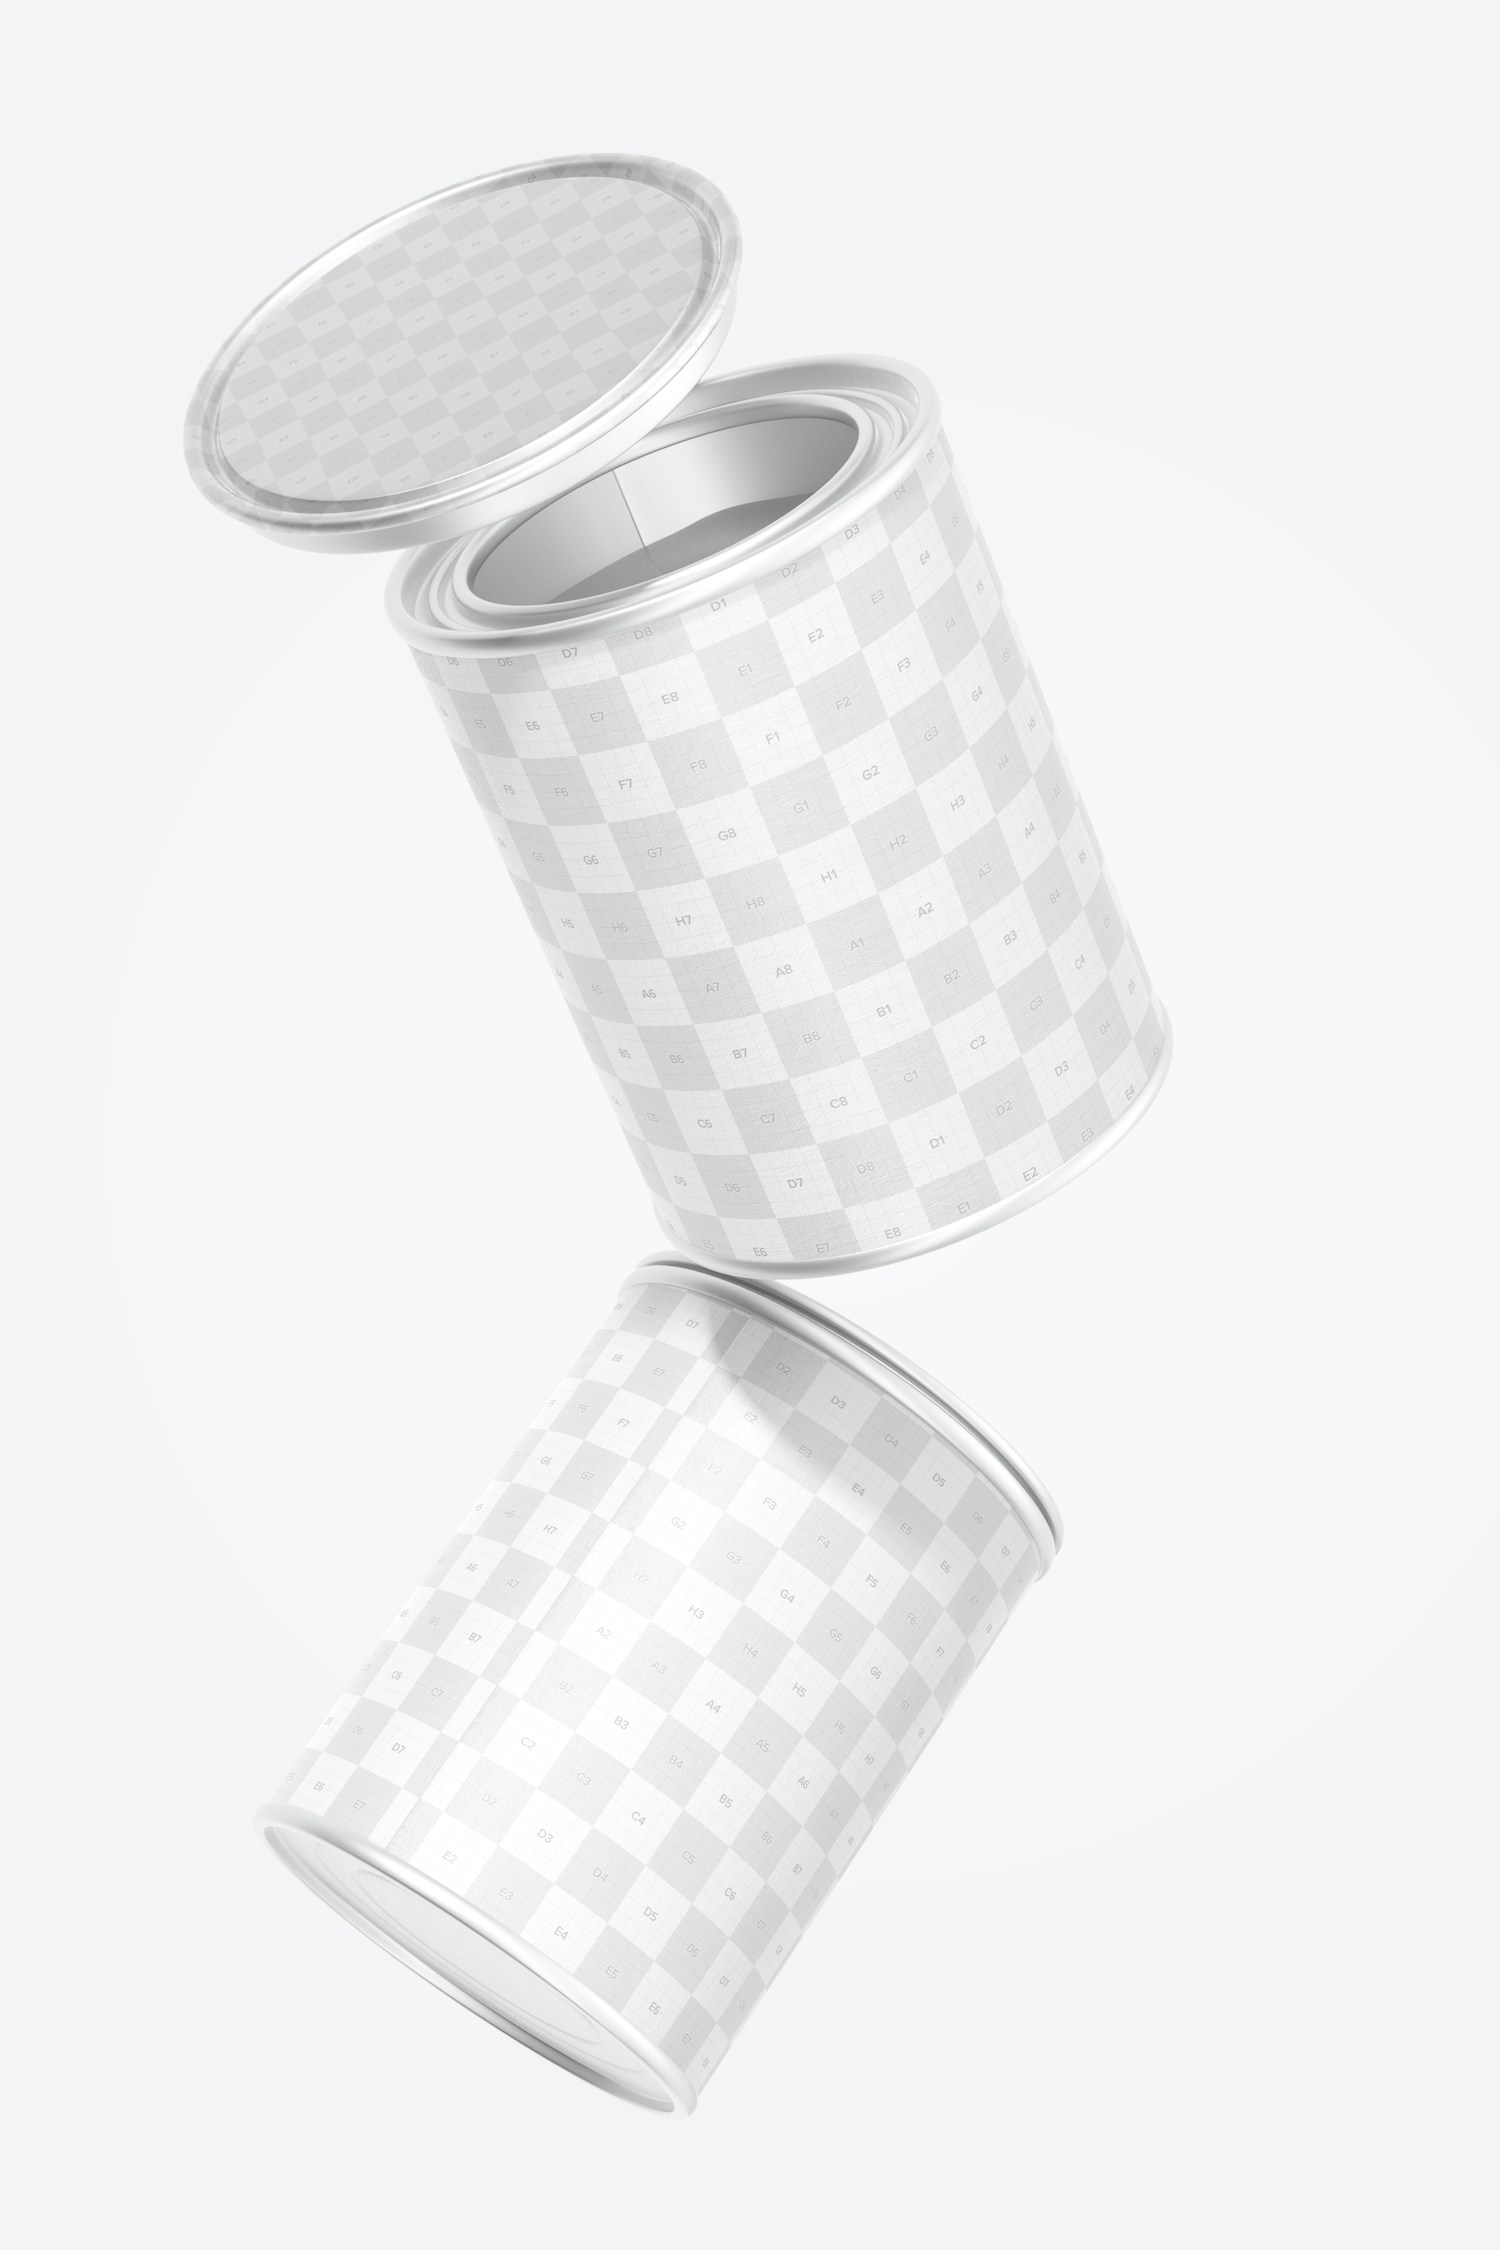 Paint Tin Cans Mockup, Floating